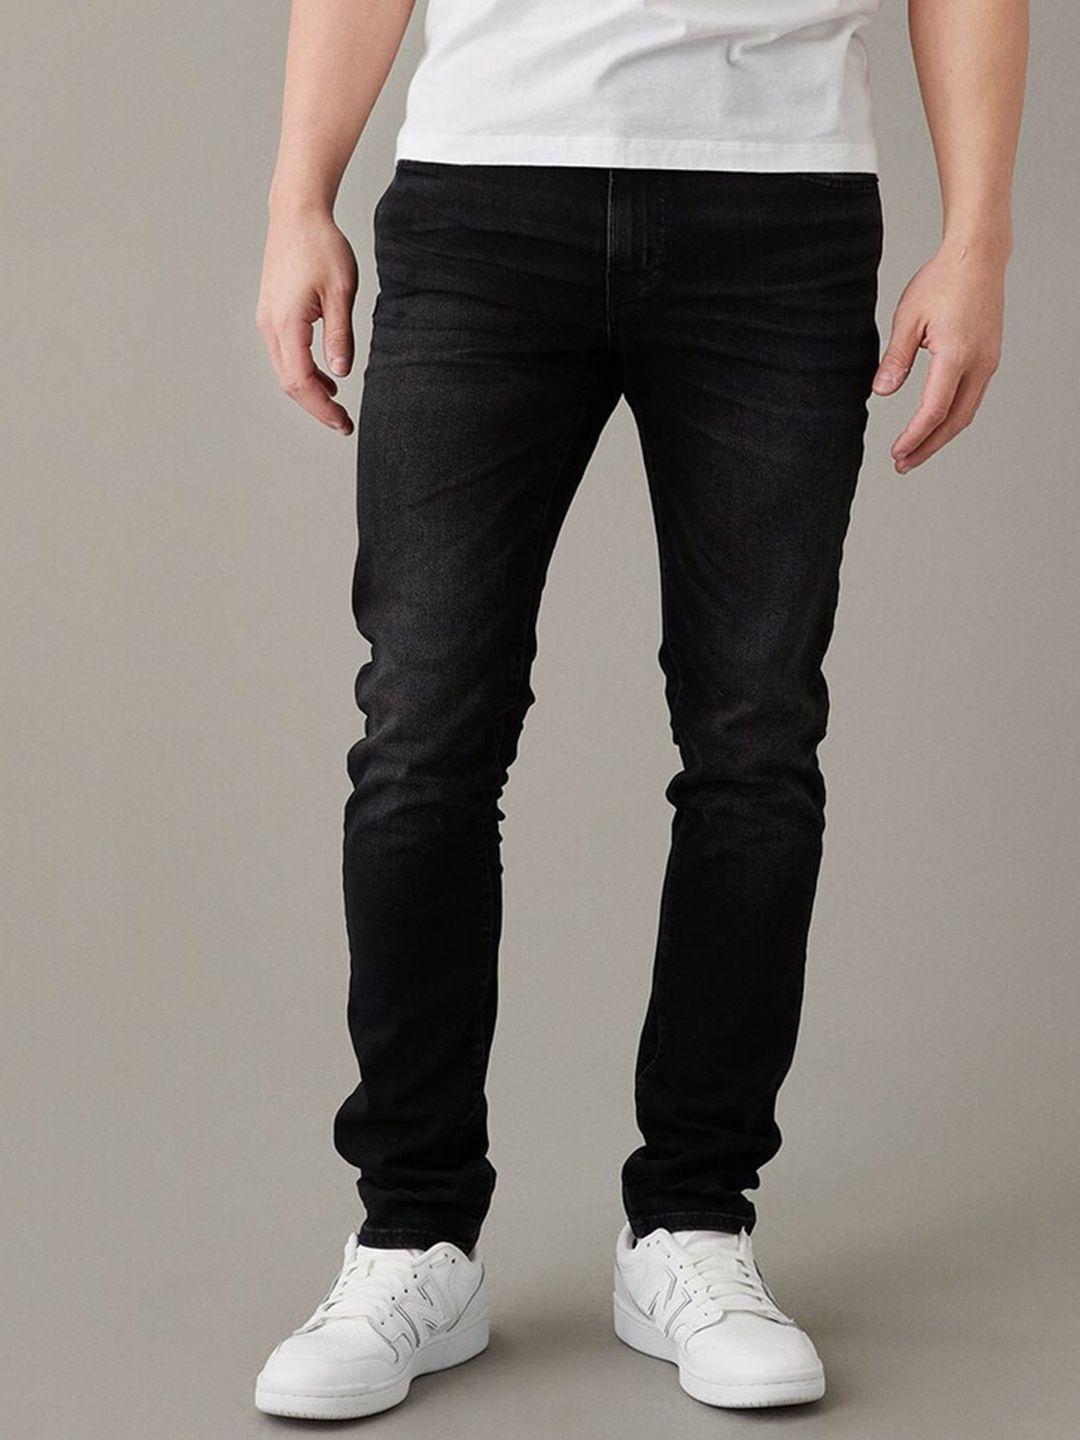 american-eagle-outfitters-men-slim-fit-mid-rise-light-fade-clean-look-stretchable-jeans